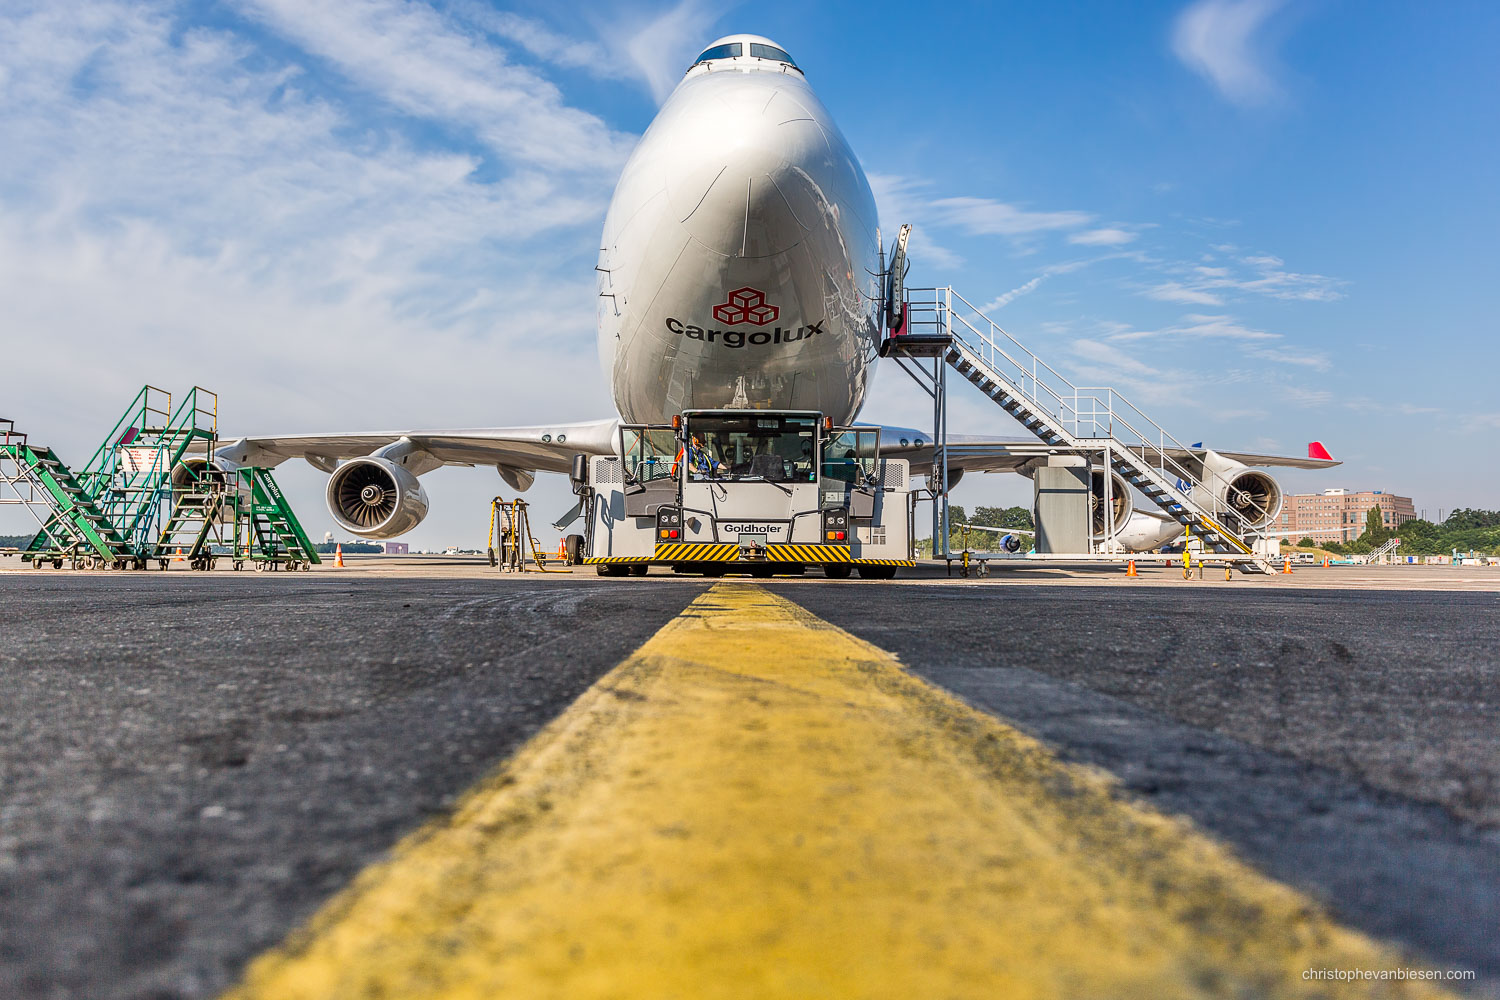 Work with me - Commission Work - Boeing 747 of Luxembourg's Cargolux fleet - The Valiant - Photography by Christophe Van Biesen - Luxembourg Landscape and Travel Photographer